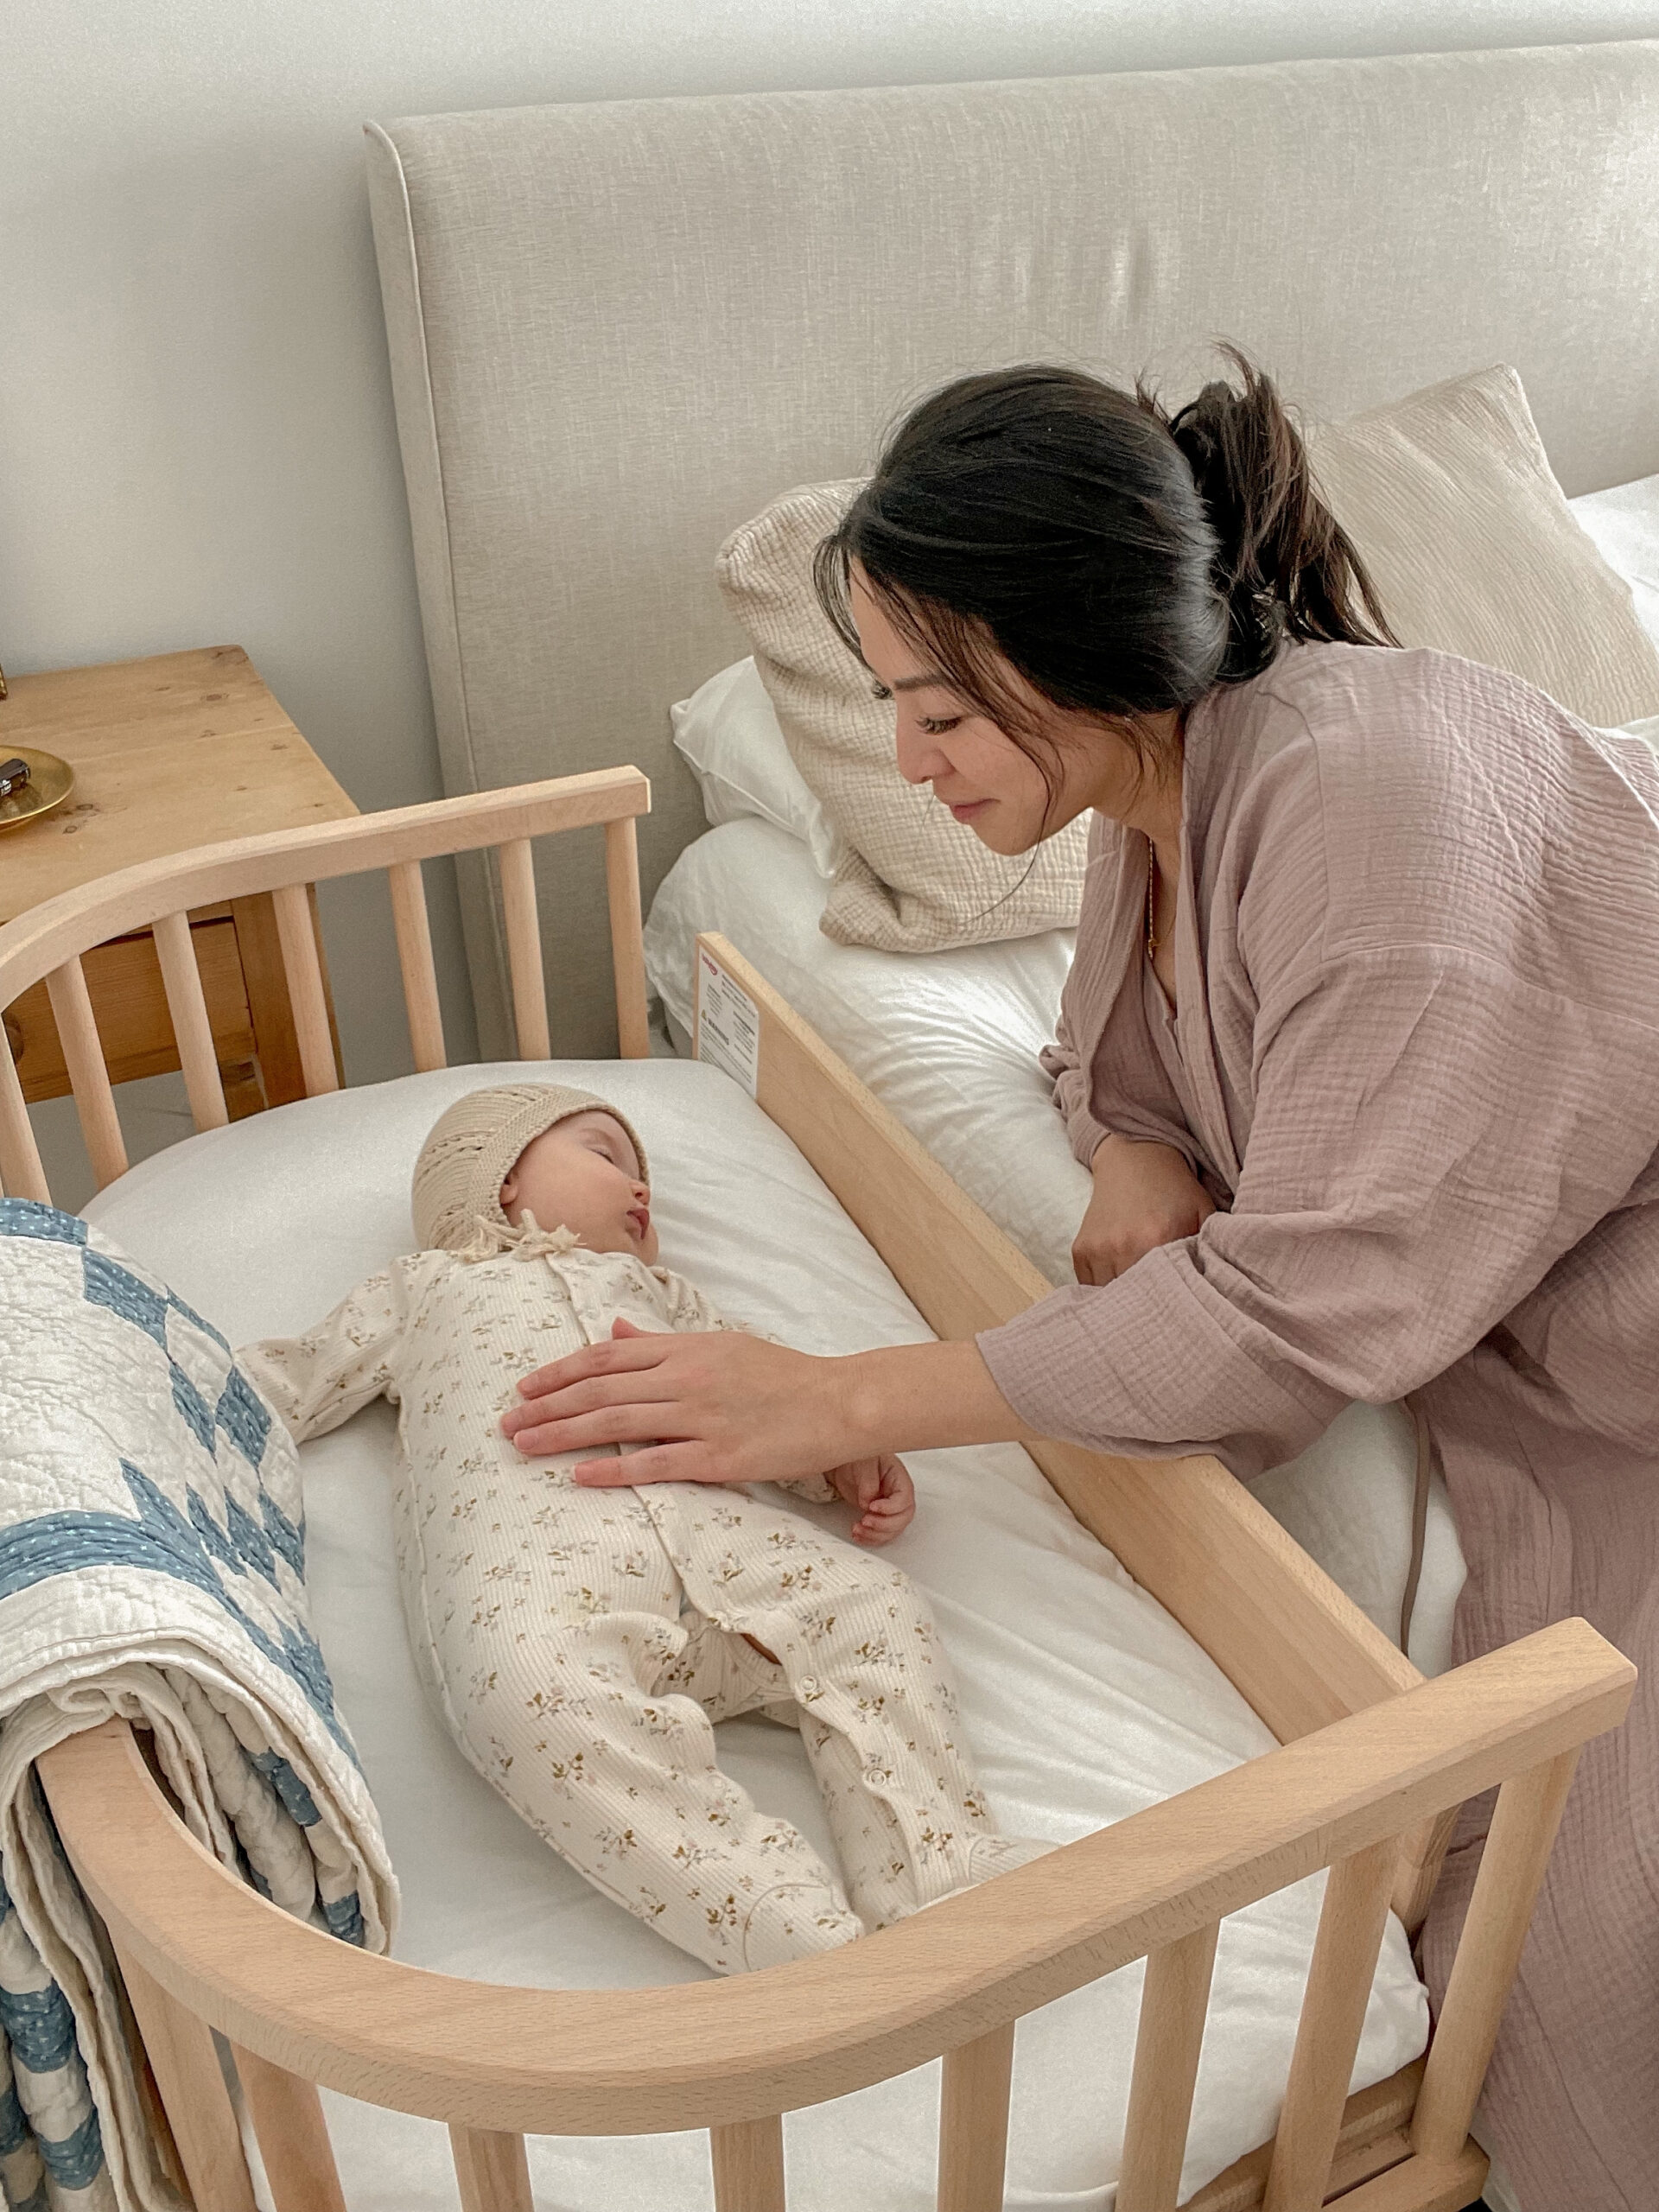 Why Is My Baby Fighting Sleep? (And What Can I Do About It?)